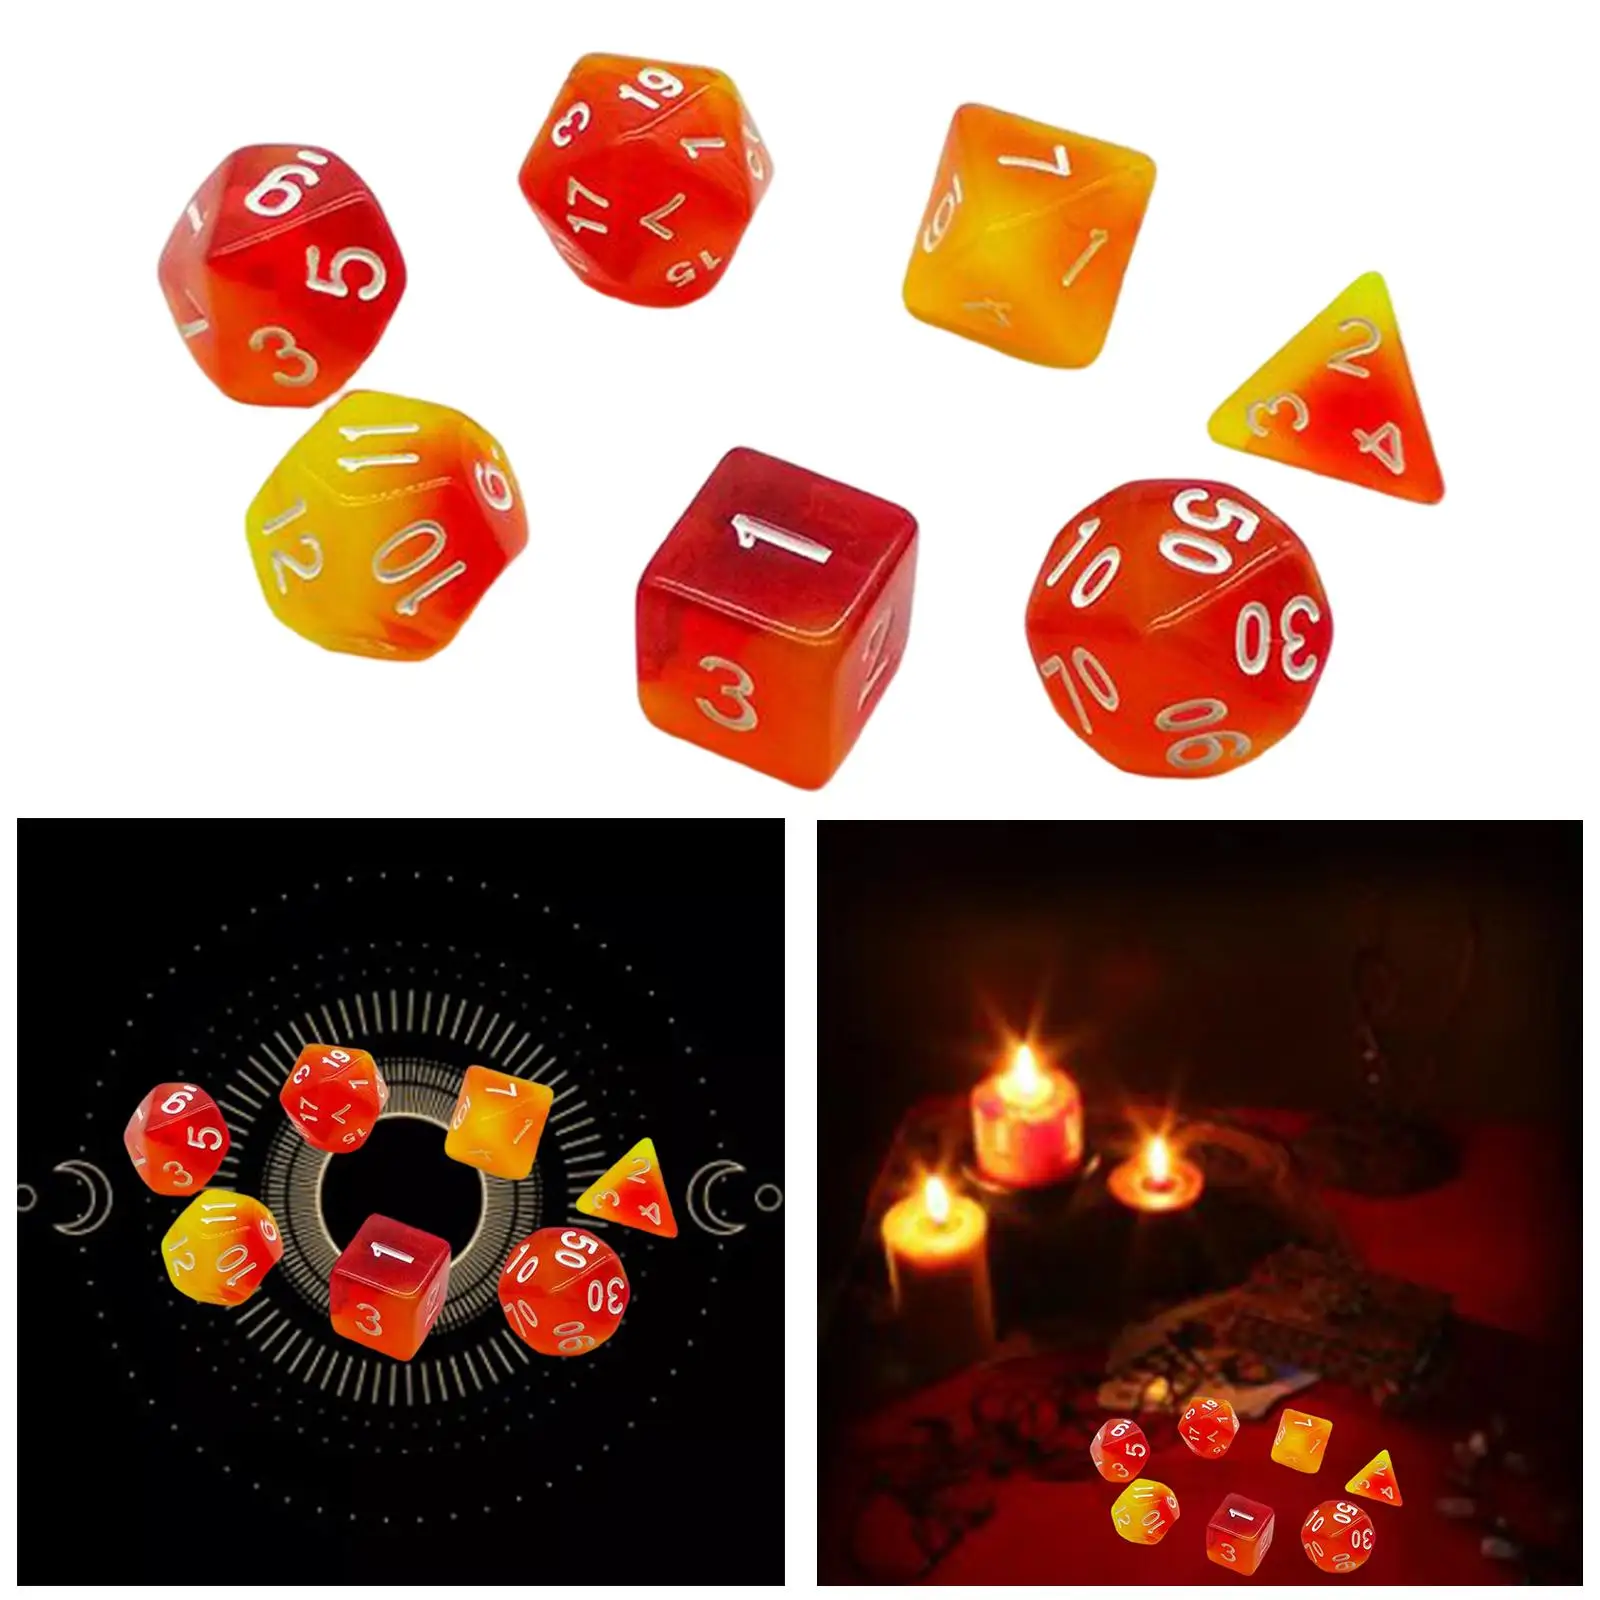 7x Acrylic Polyhedral Dice TRPG DND Games for Leisure Entertainment Dice Set